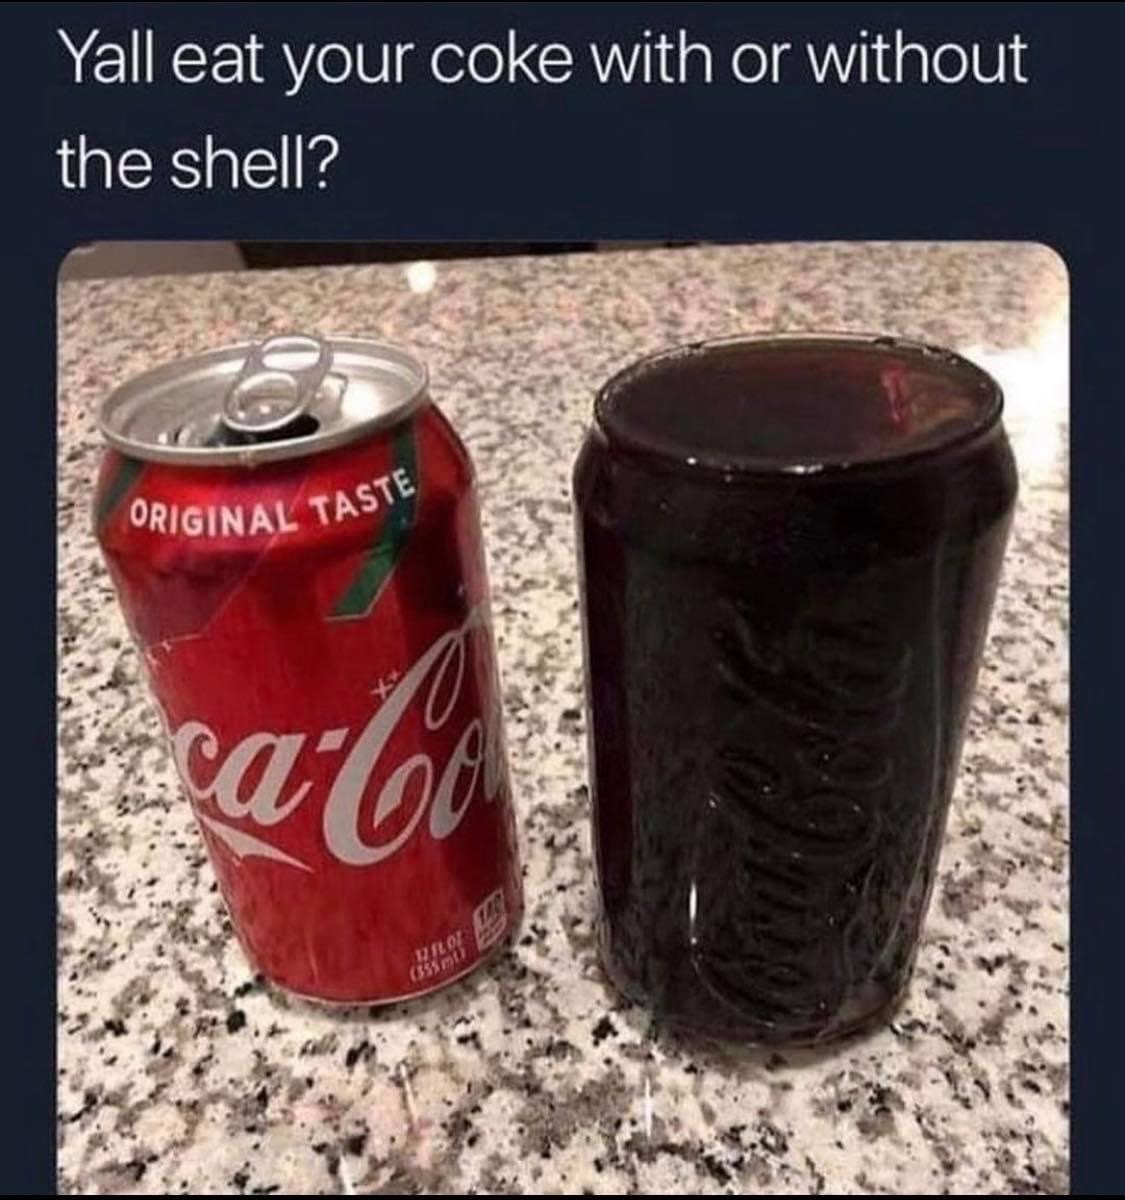 coke with or without the shell - Yall eat your coke with or without the shell? Original Taste Dilo